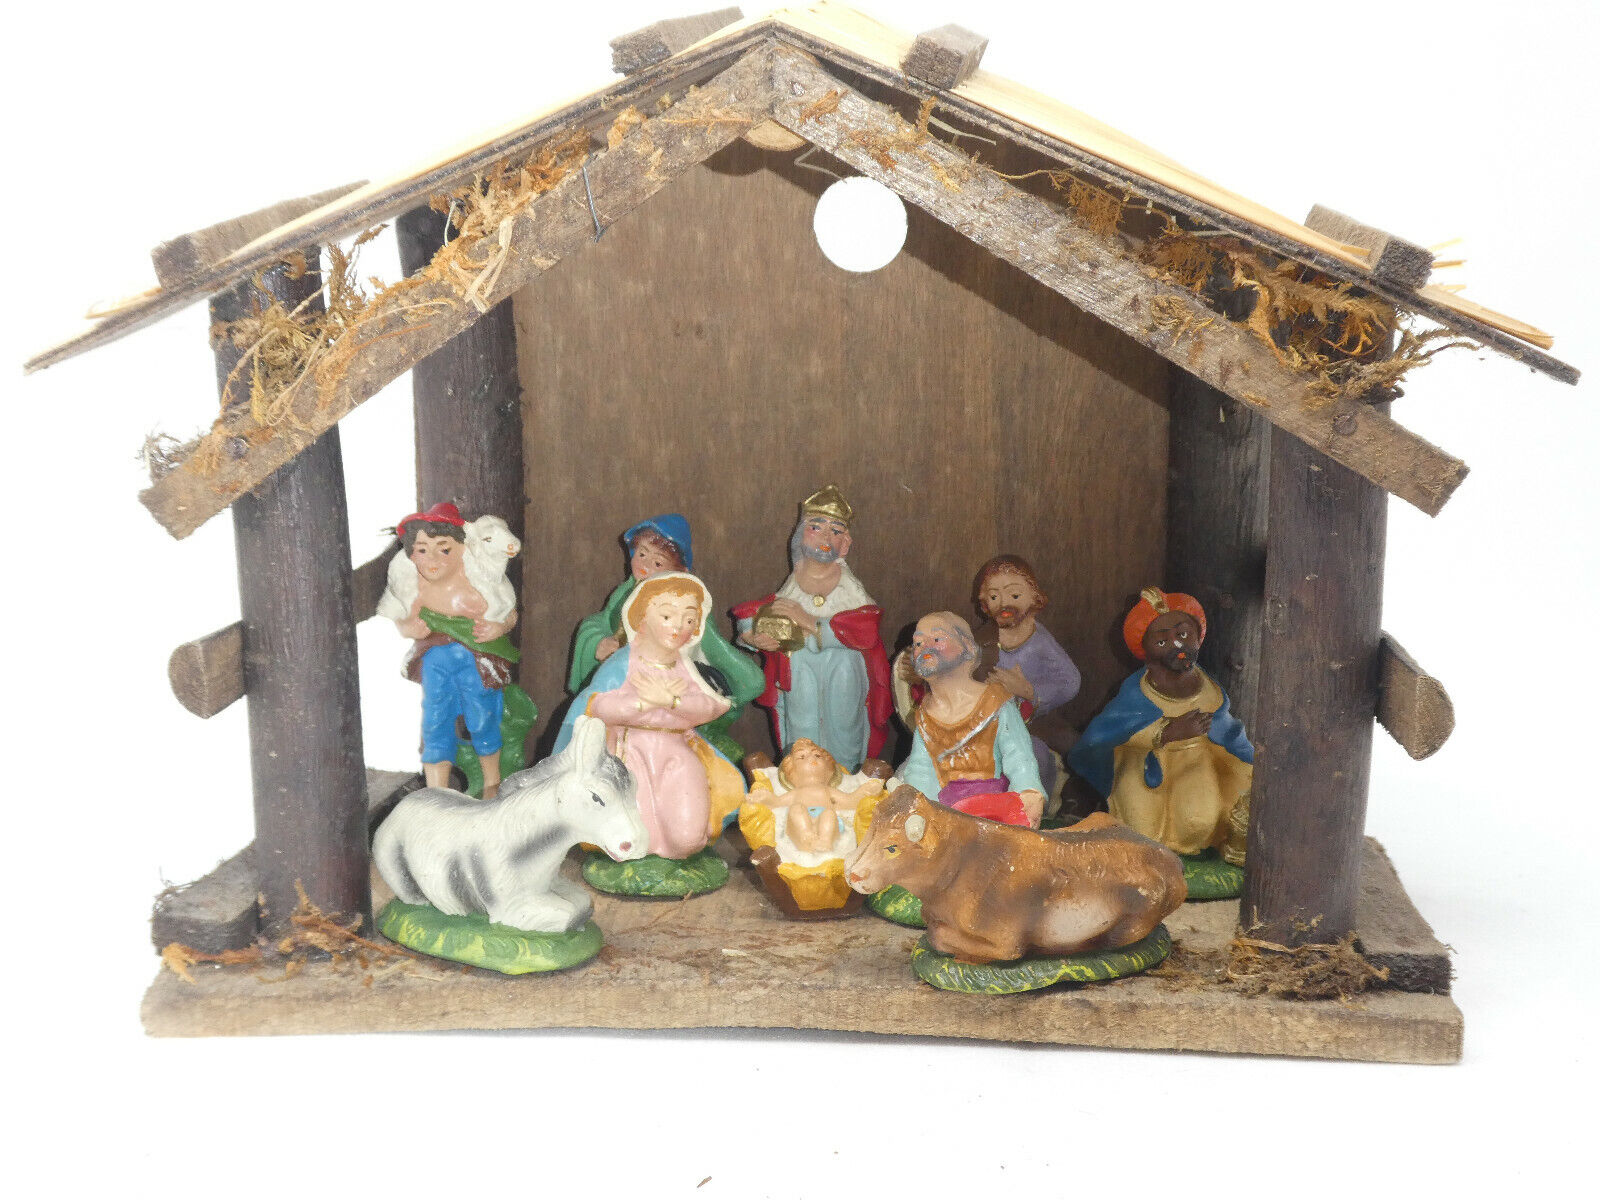 VINTAGE CHRISTMAS NATIVITY SET 10 PCS FIGURINES CHALKWARE & WOOD MADE IN ITALY